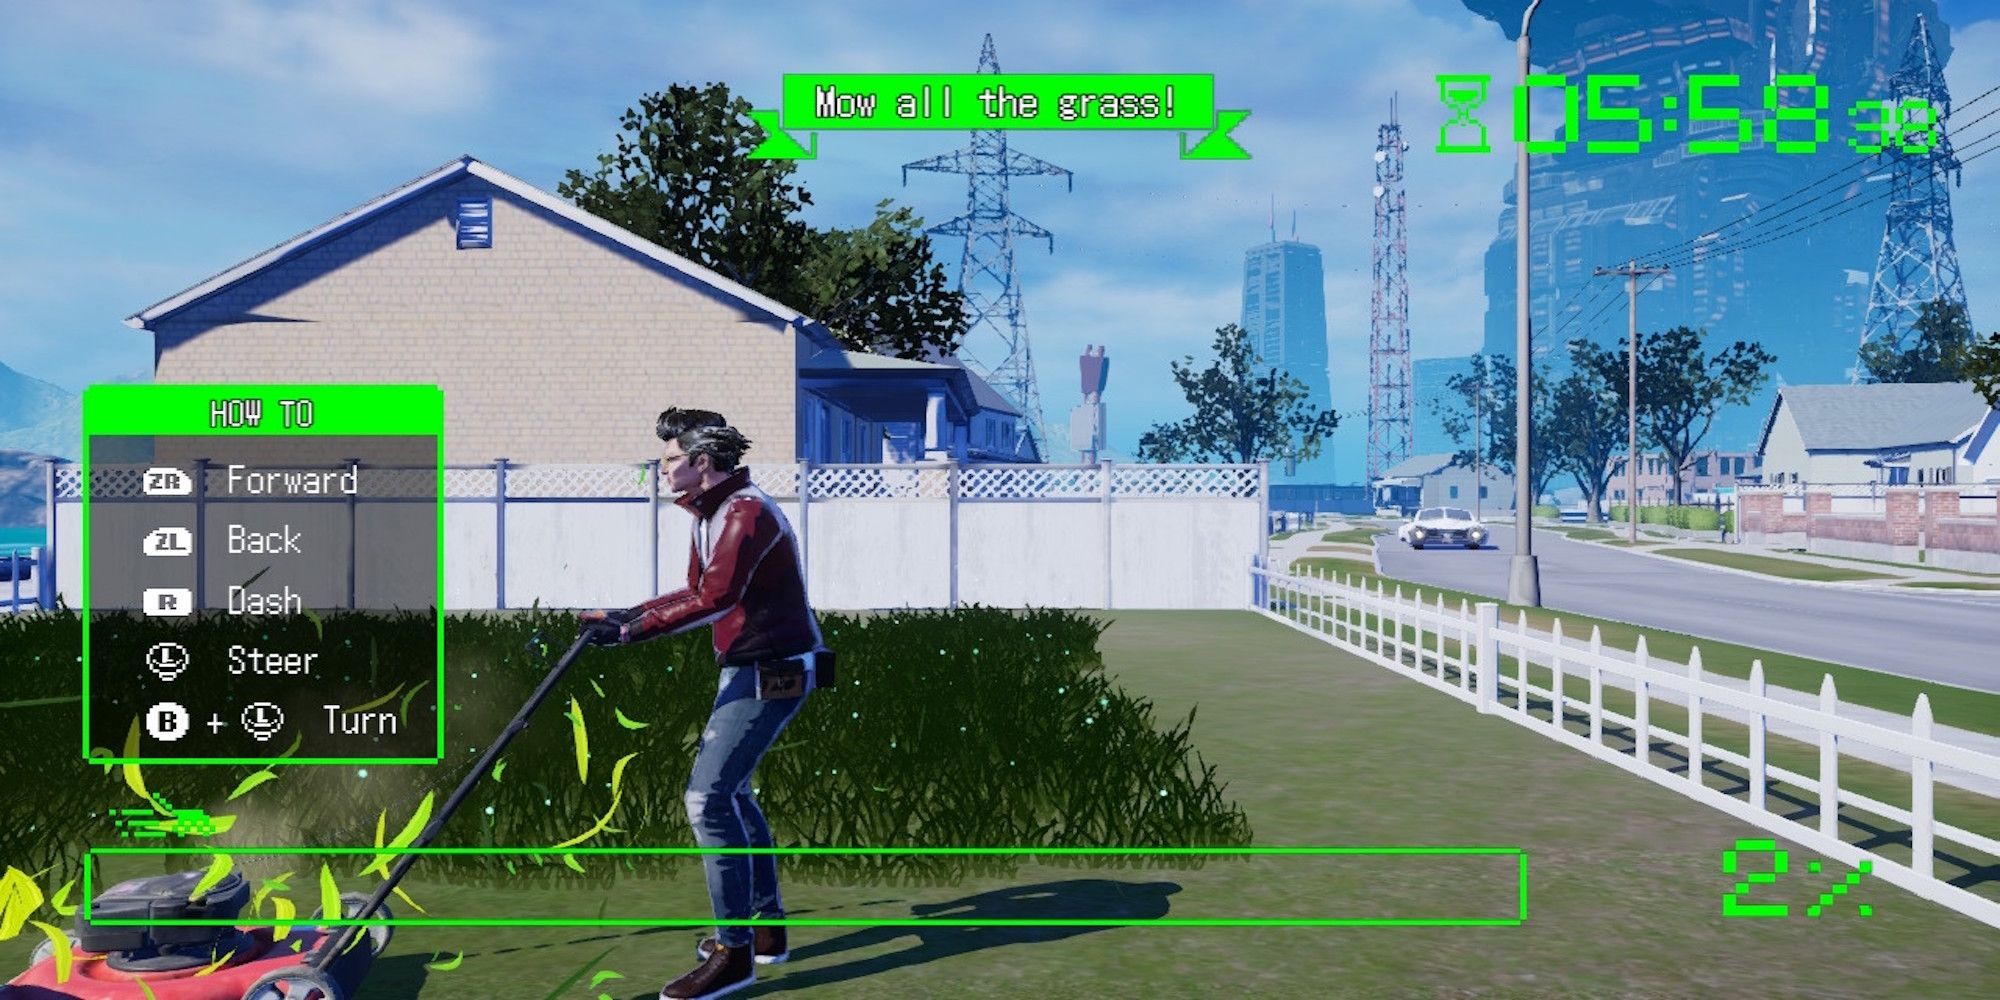 Mowing mini game from No More Heroes III